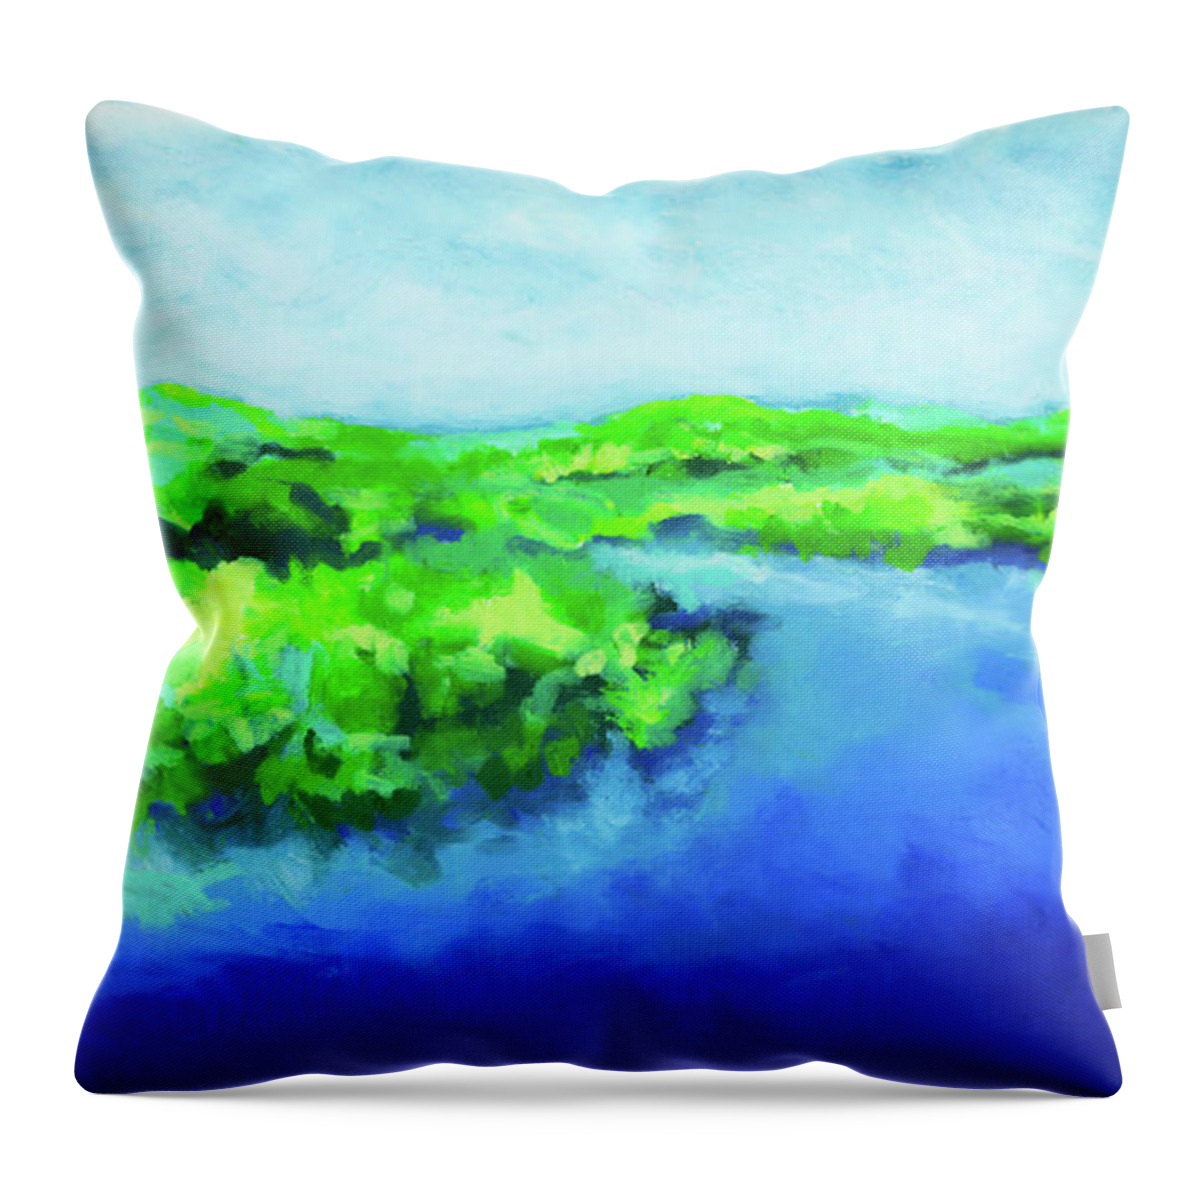 River Throw Pillow featuring the painting River Bend by Stephen Anderson